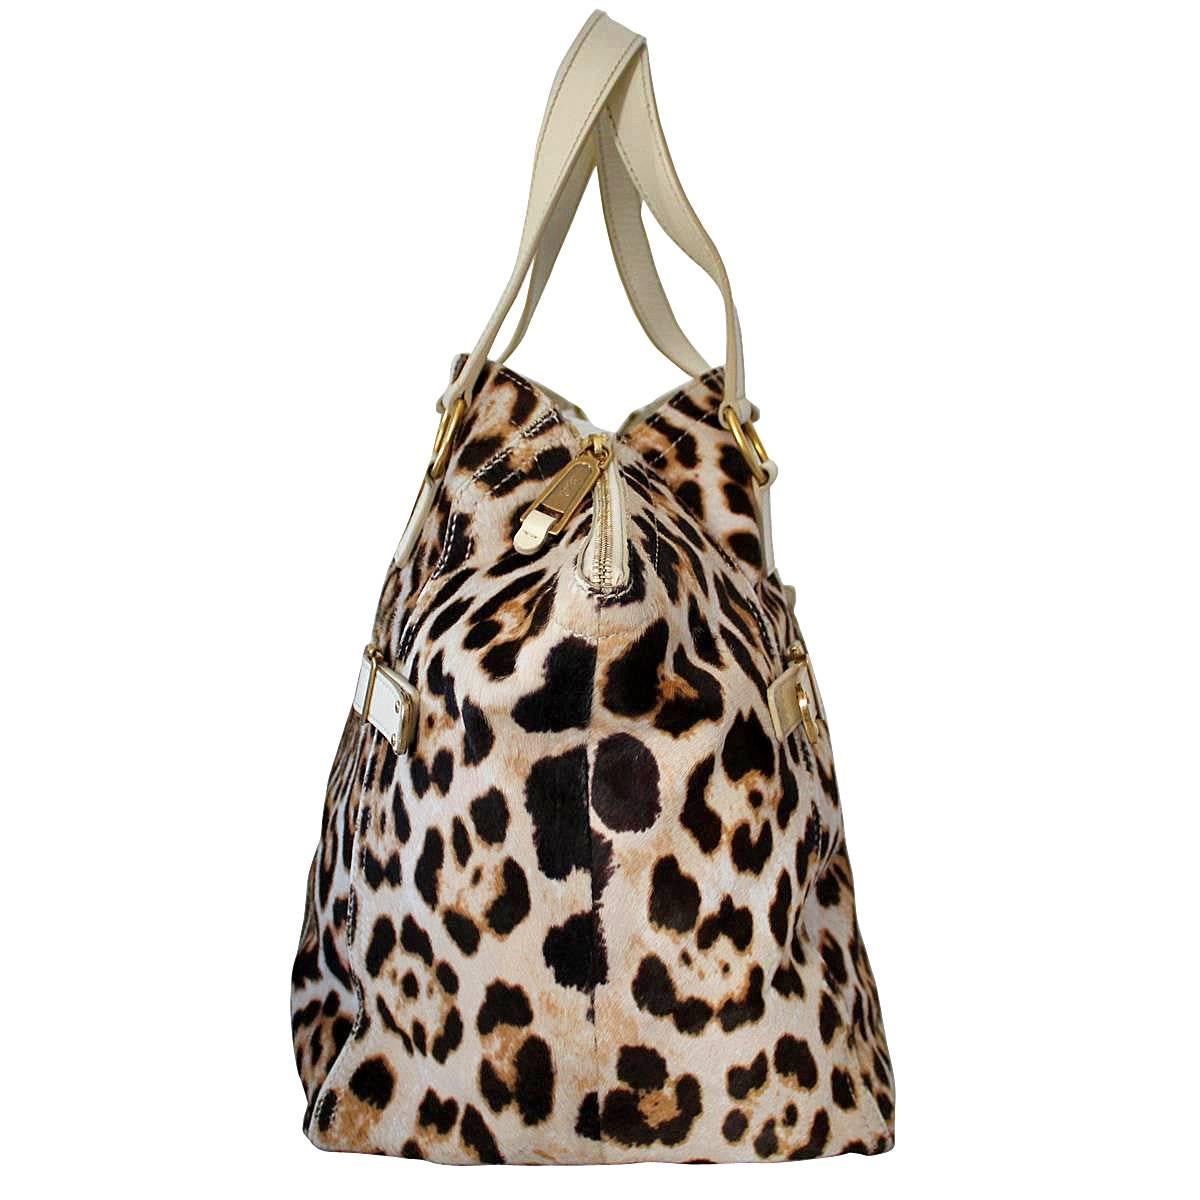 Beauiful animalier bag by Saint Laurent
Animalier horsehair
Cream leather
Two handles
Internal pocket
Cm 48 x 34 x 25 (18.8 x 13.3 x 9.84 inches)
Worldwide express shipping included in the price !